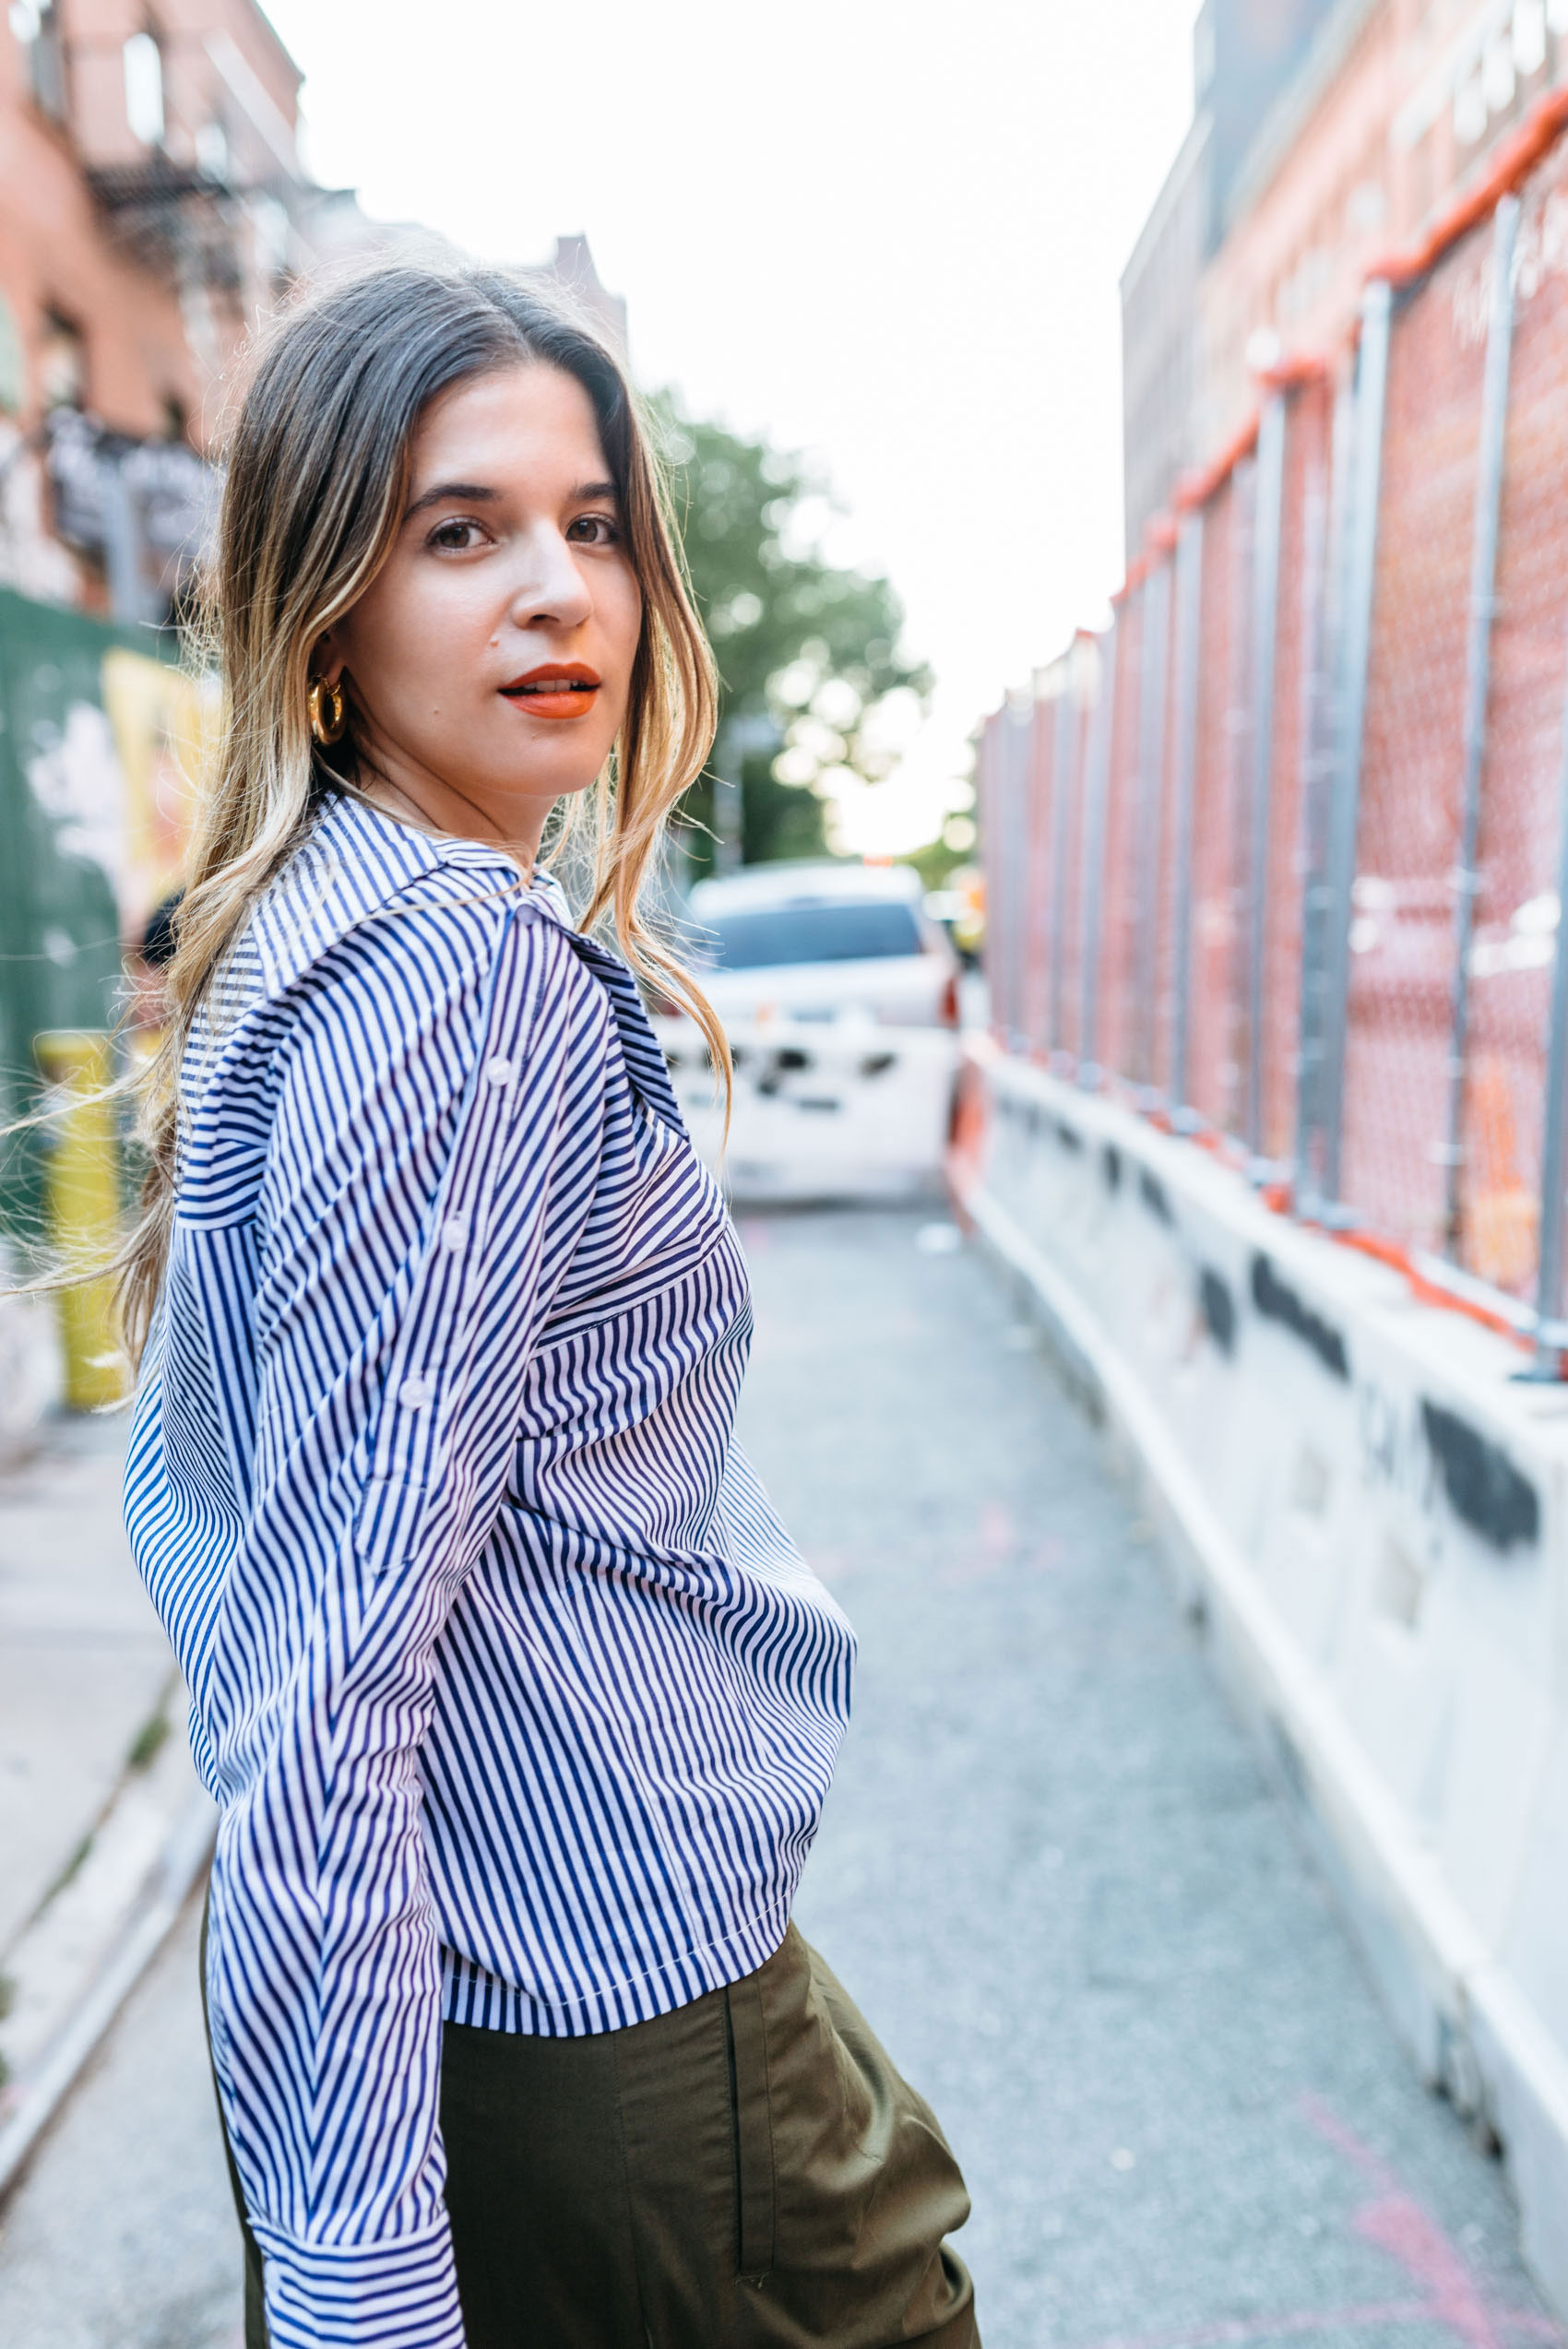 Maristella wears a deconstructed shirt with buttons down the sleeves at New York Fashion Week